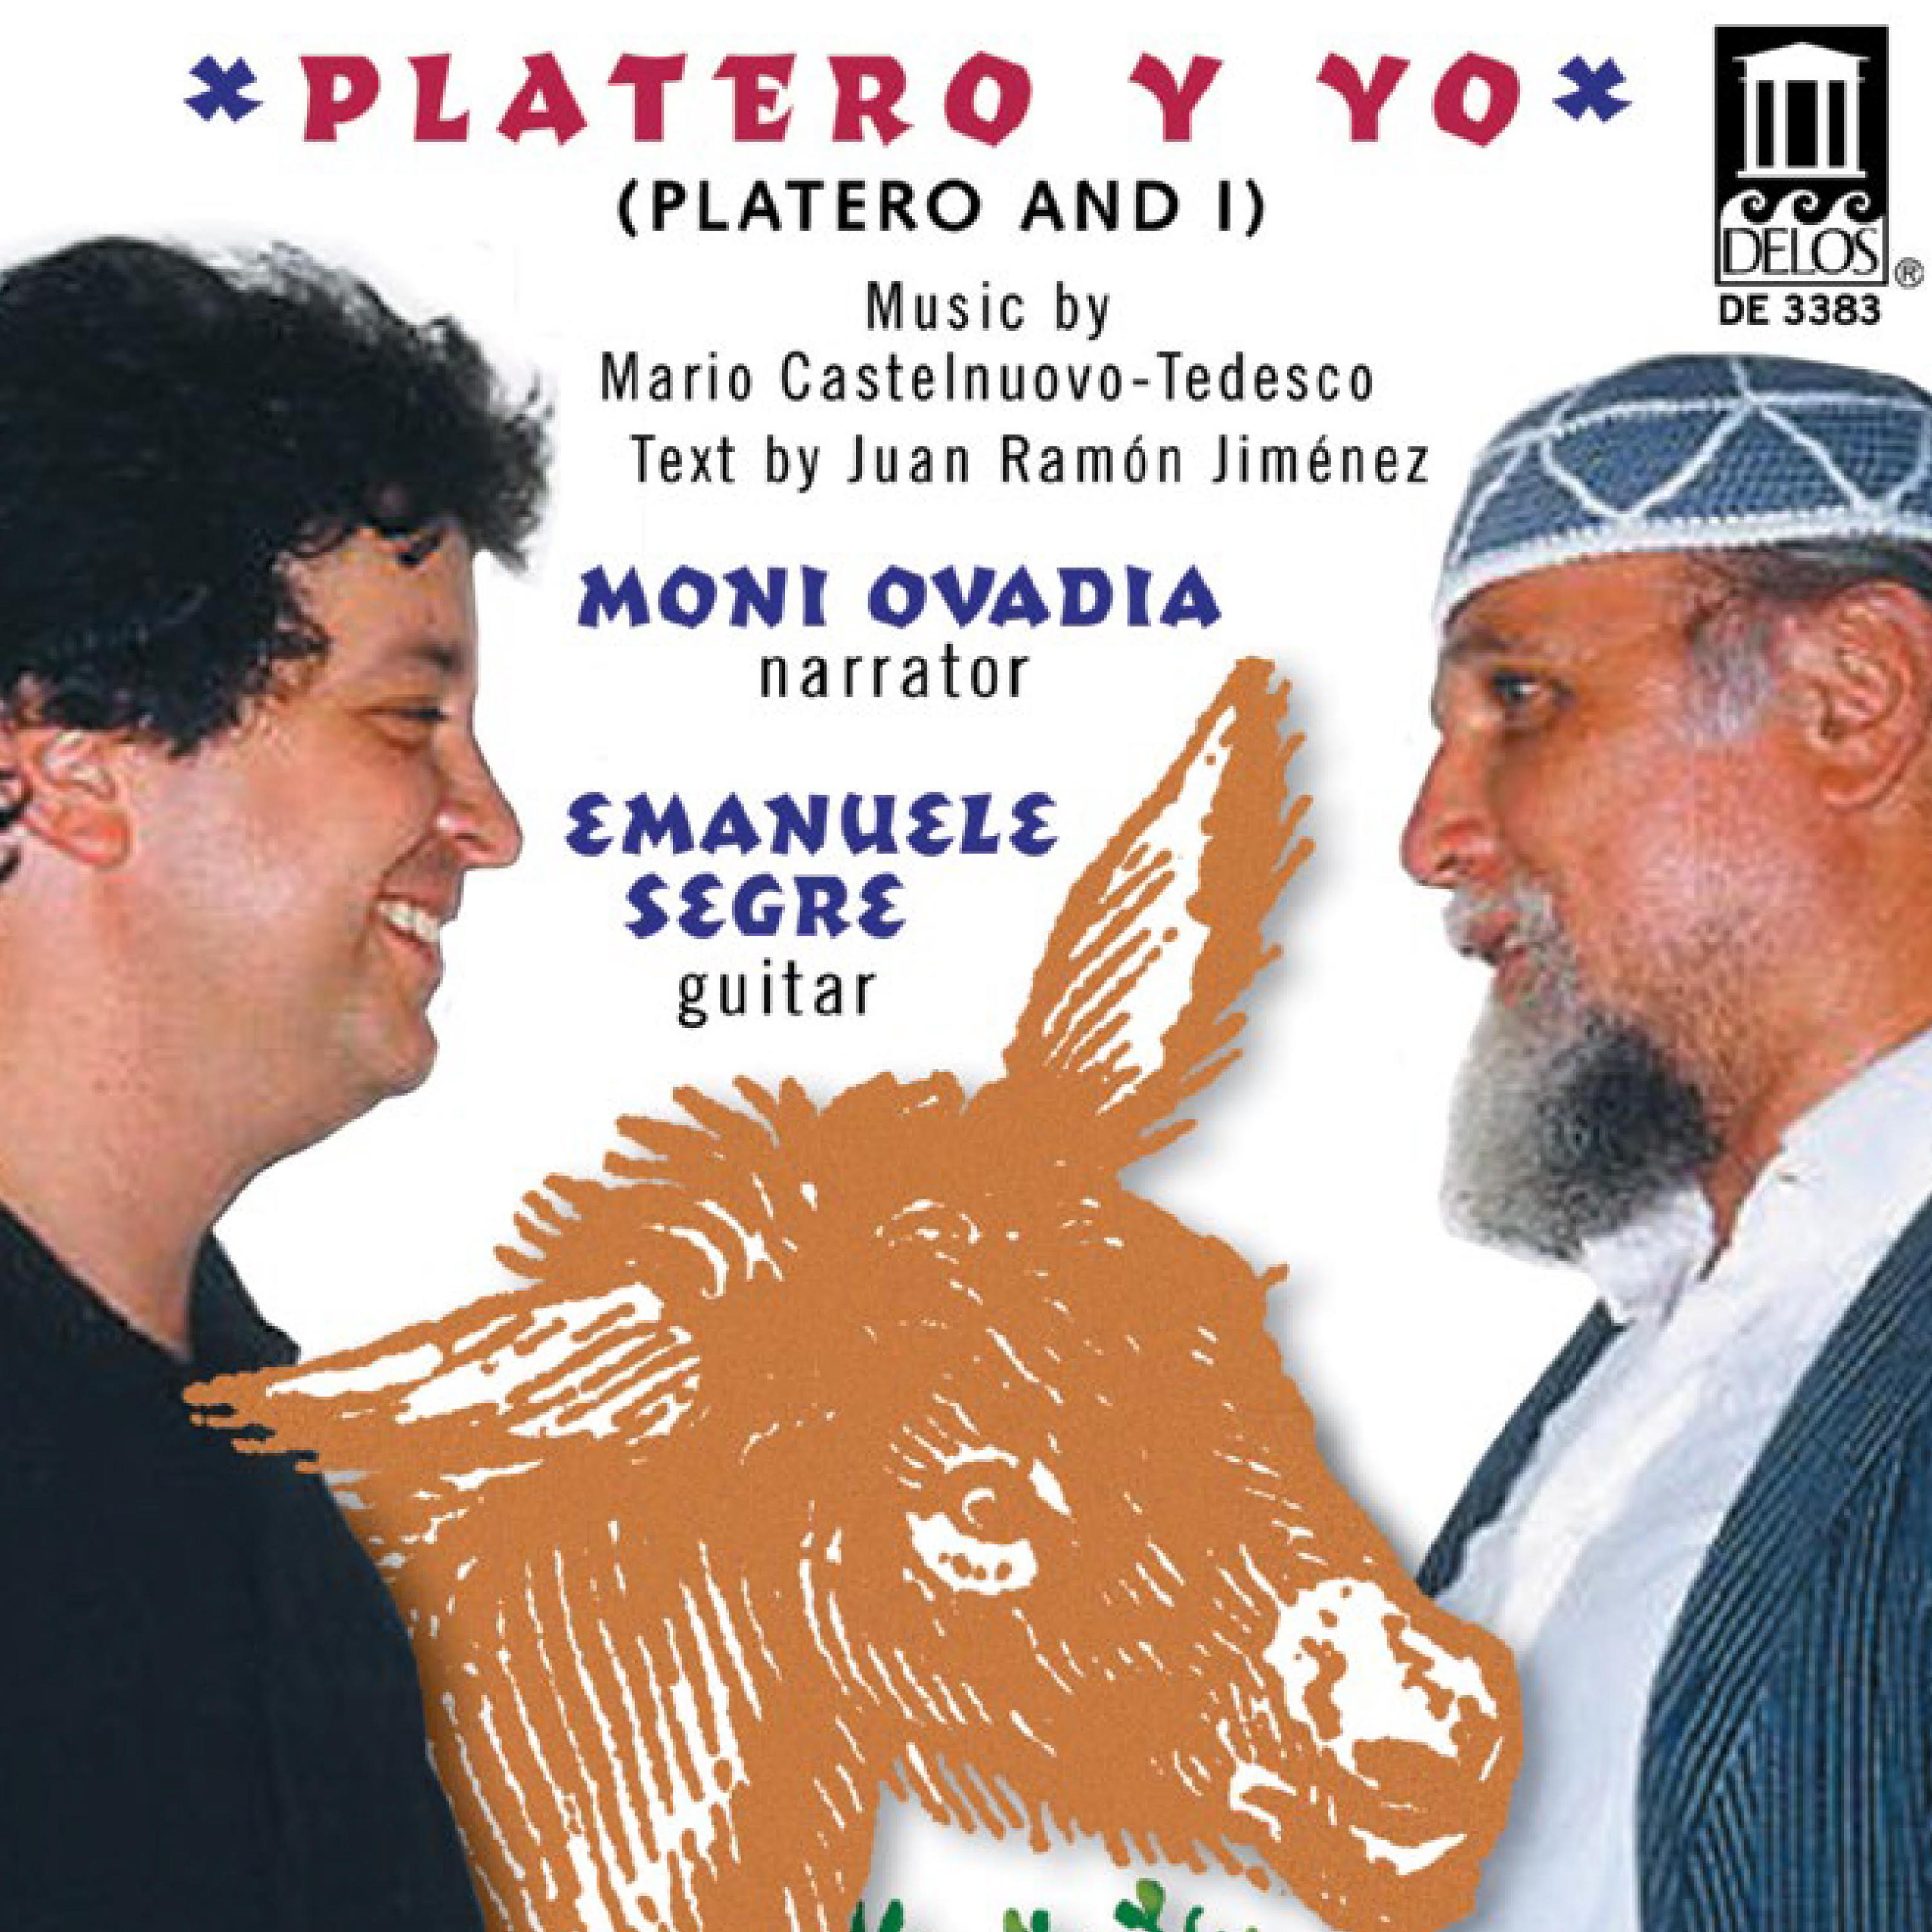 Platero and I, Op. 190: Death